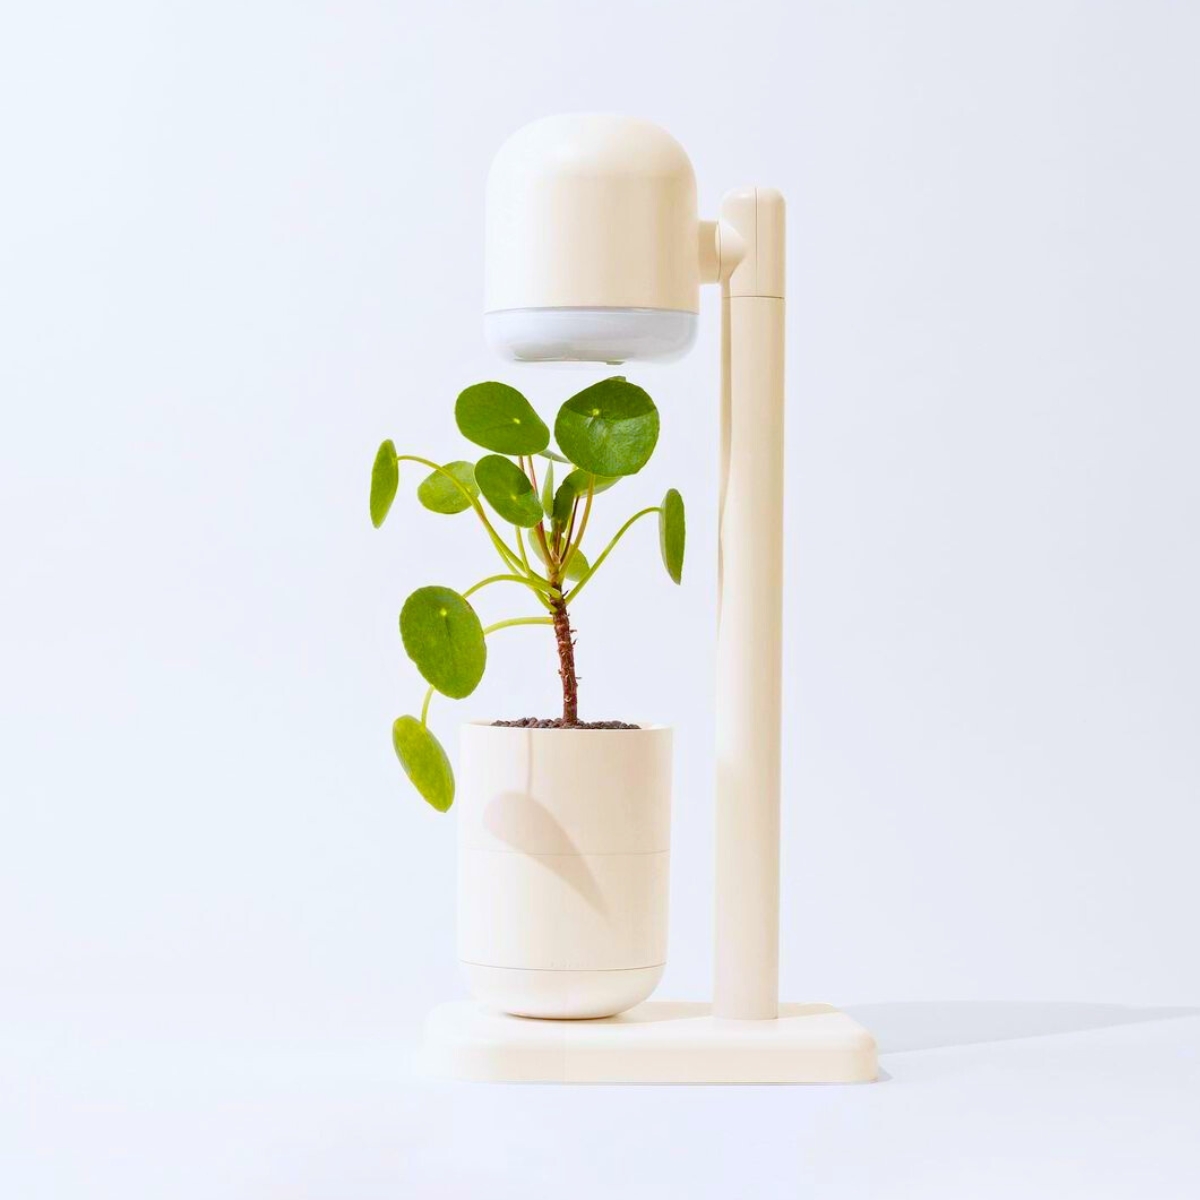 Watering a plant automatically with Moss lamp